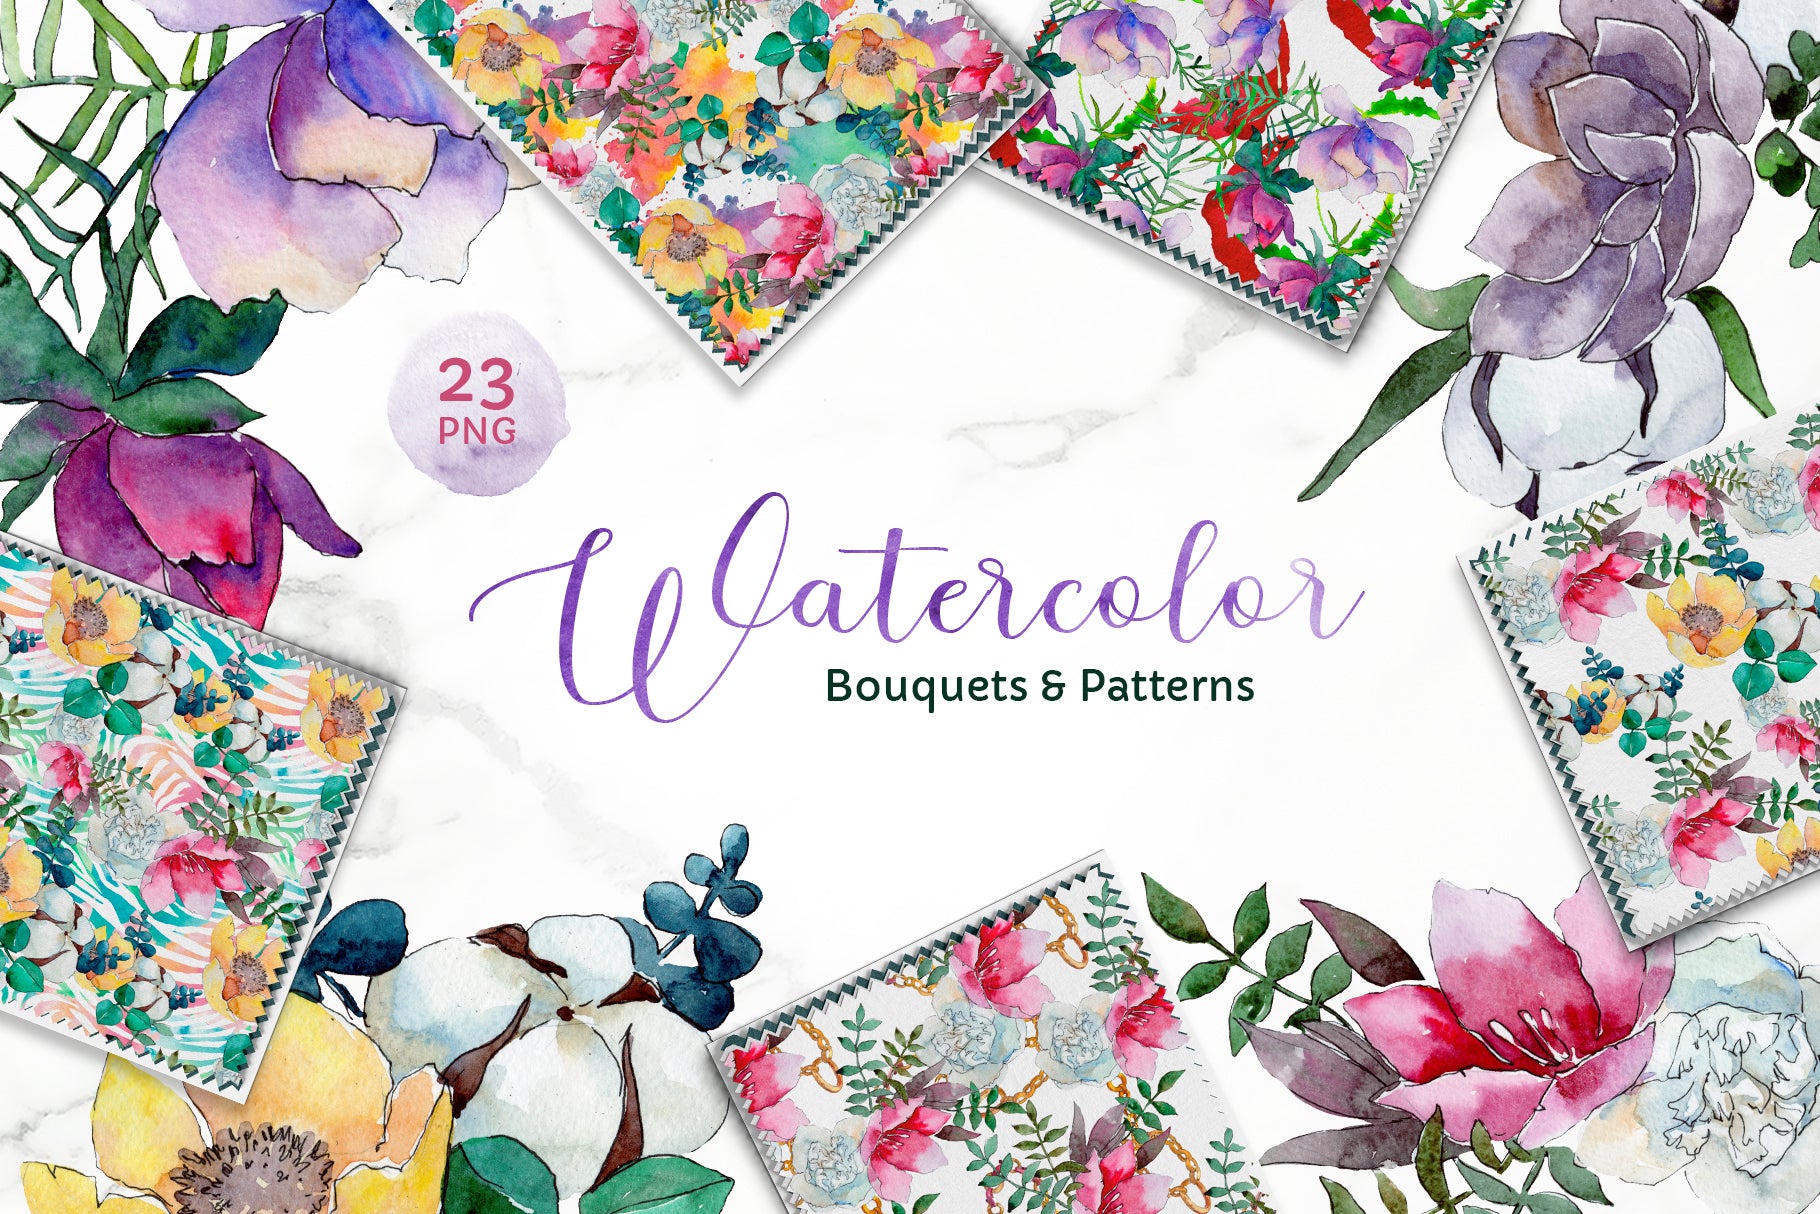 Bouquet of flowers Vienna Waltz Watercolor background clipart PNG